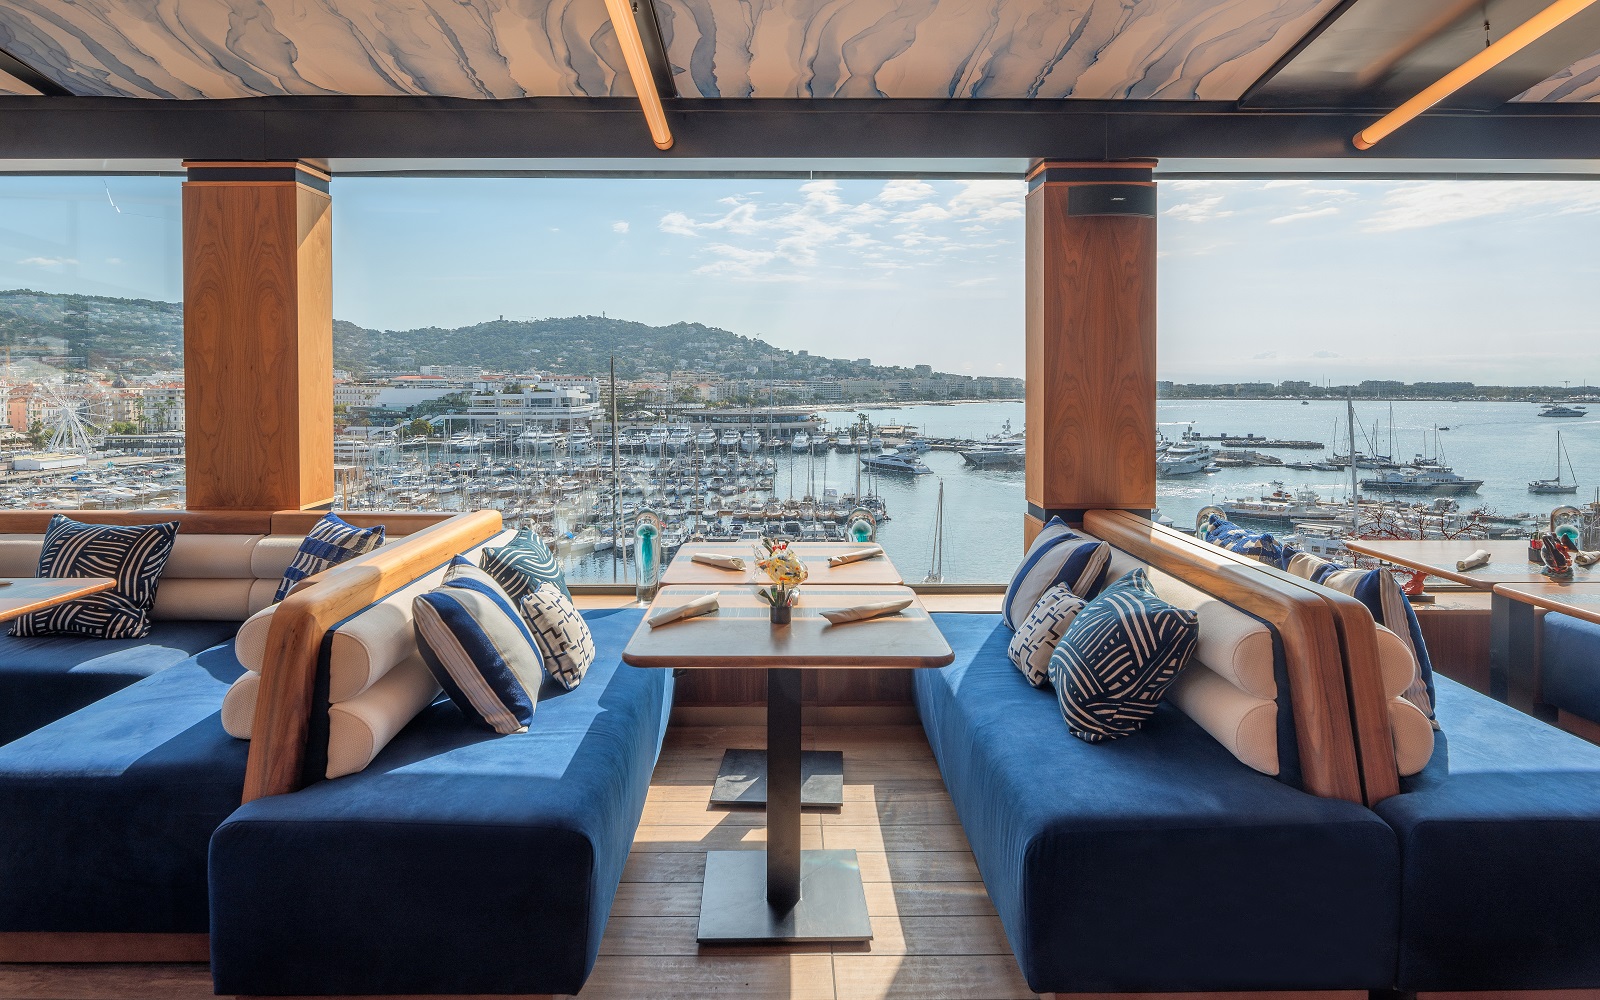 blue bench seating on either side of tables set for breakfast with views over Cannes and the Mediterranean